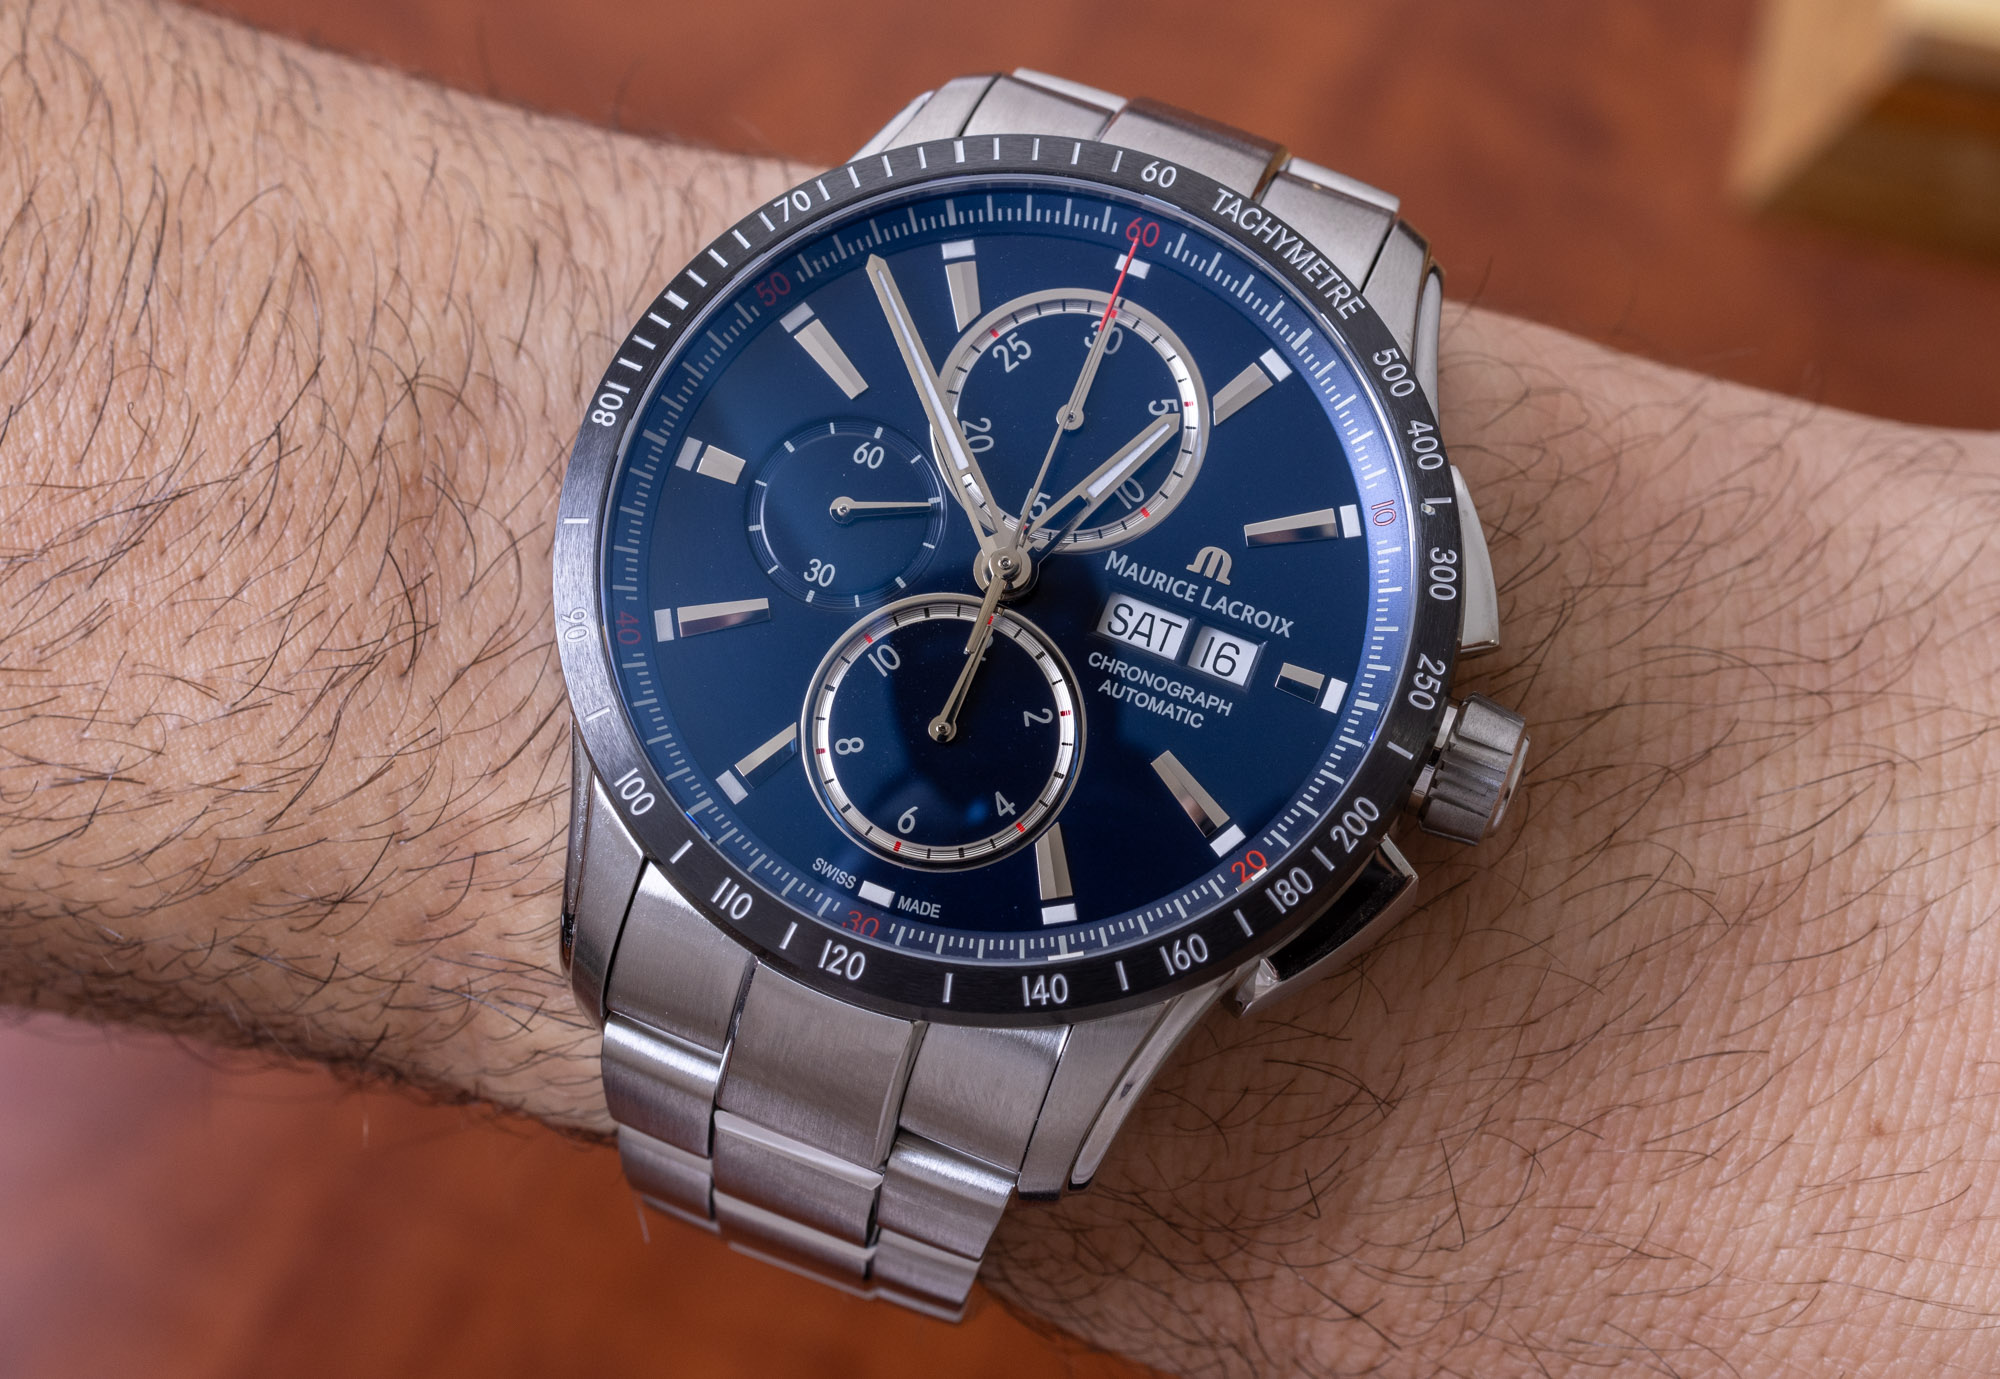 43mm PONTOS Watch Chronograph Lacroix S | Maurice aBlogtoWatch Review: